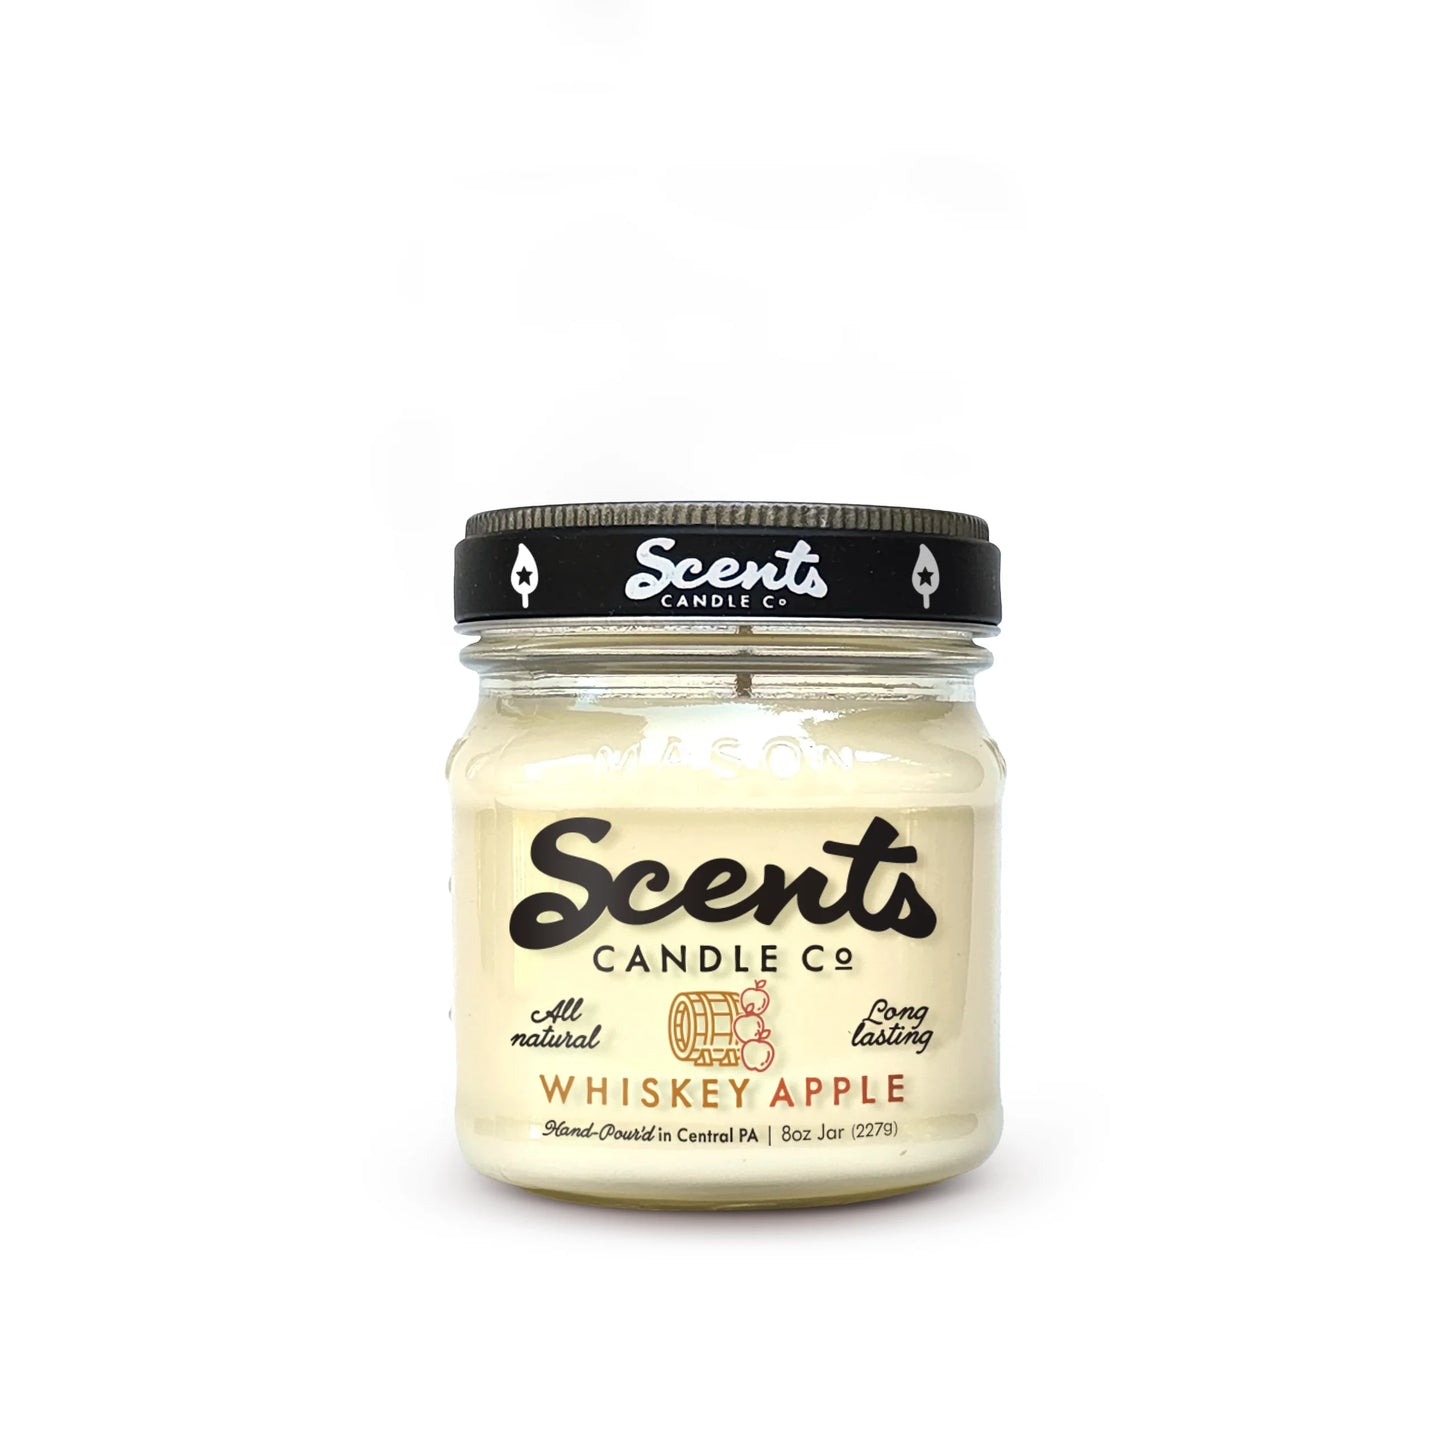 Scents Candle Co. Whiskey Apple Soy Wax Candles